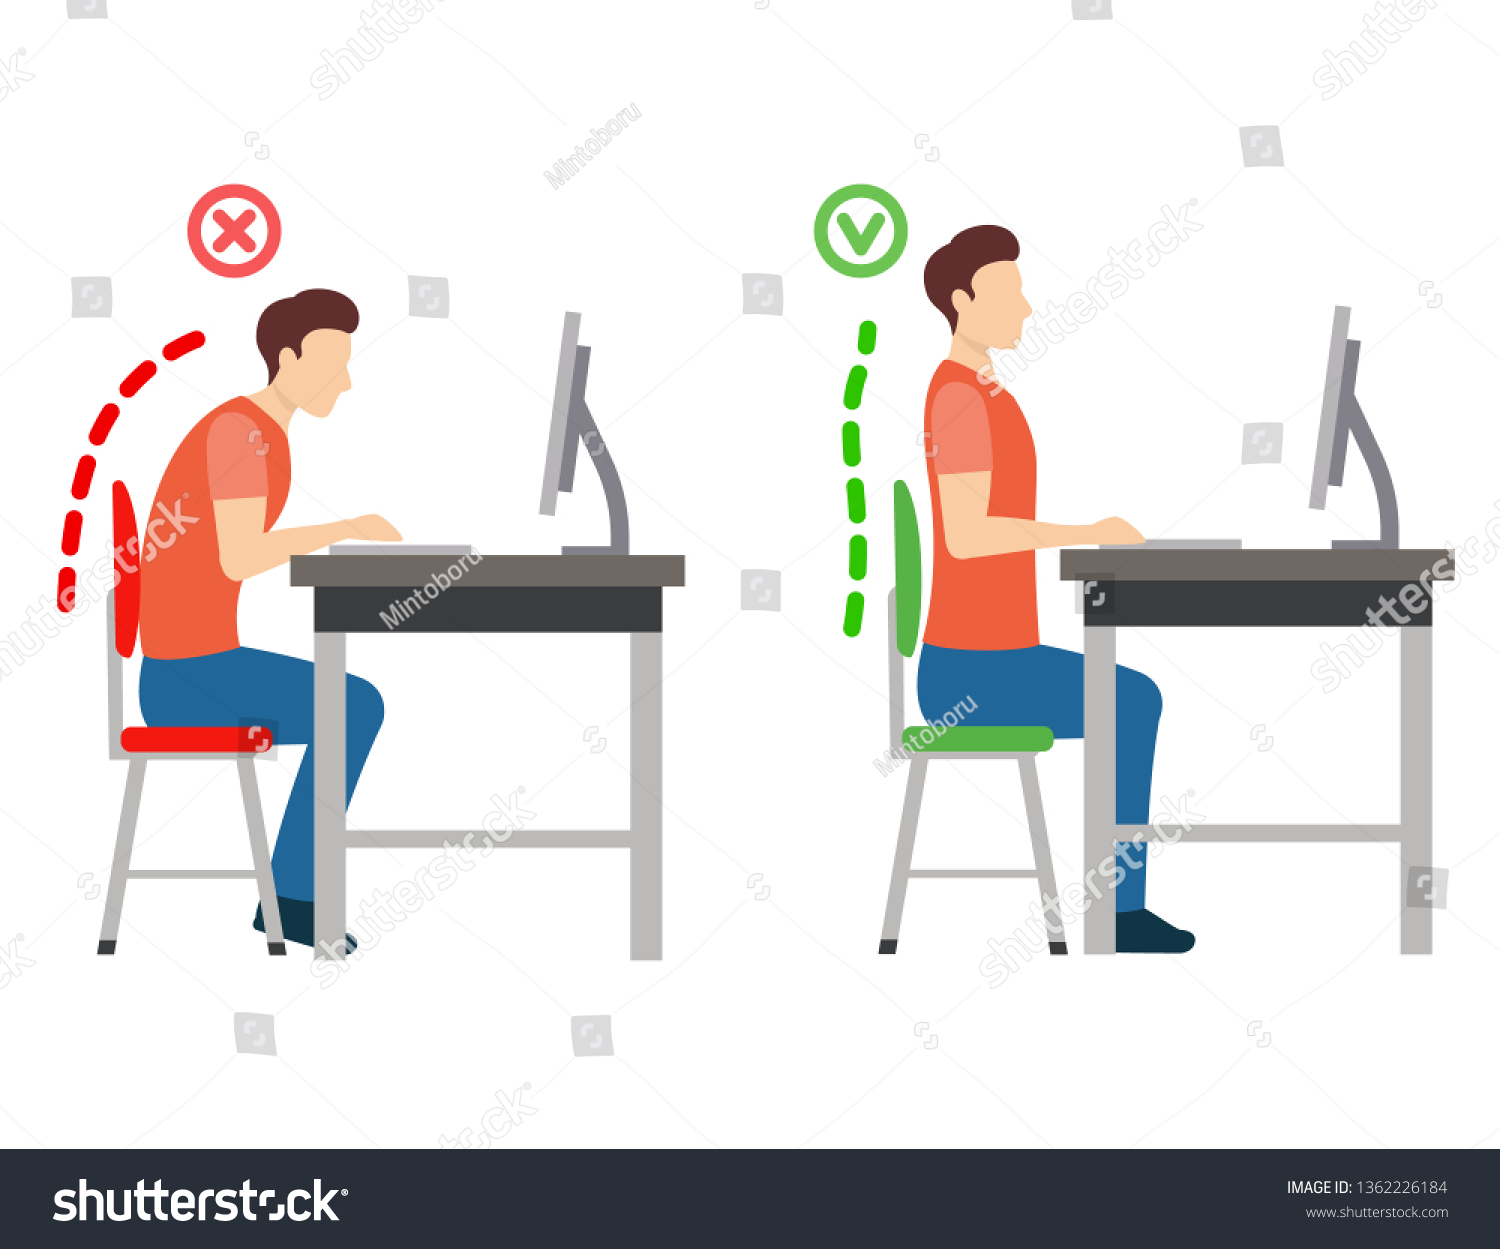 Correct Position Posture When Working Computer Stock Vector